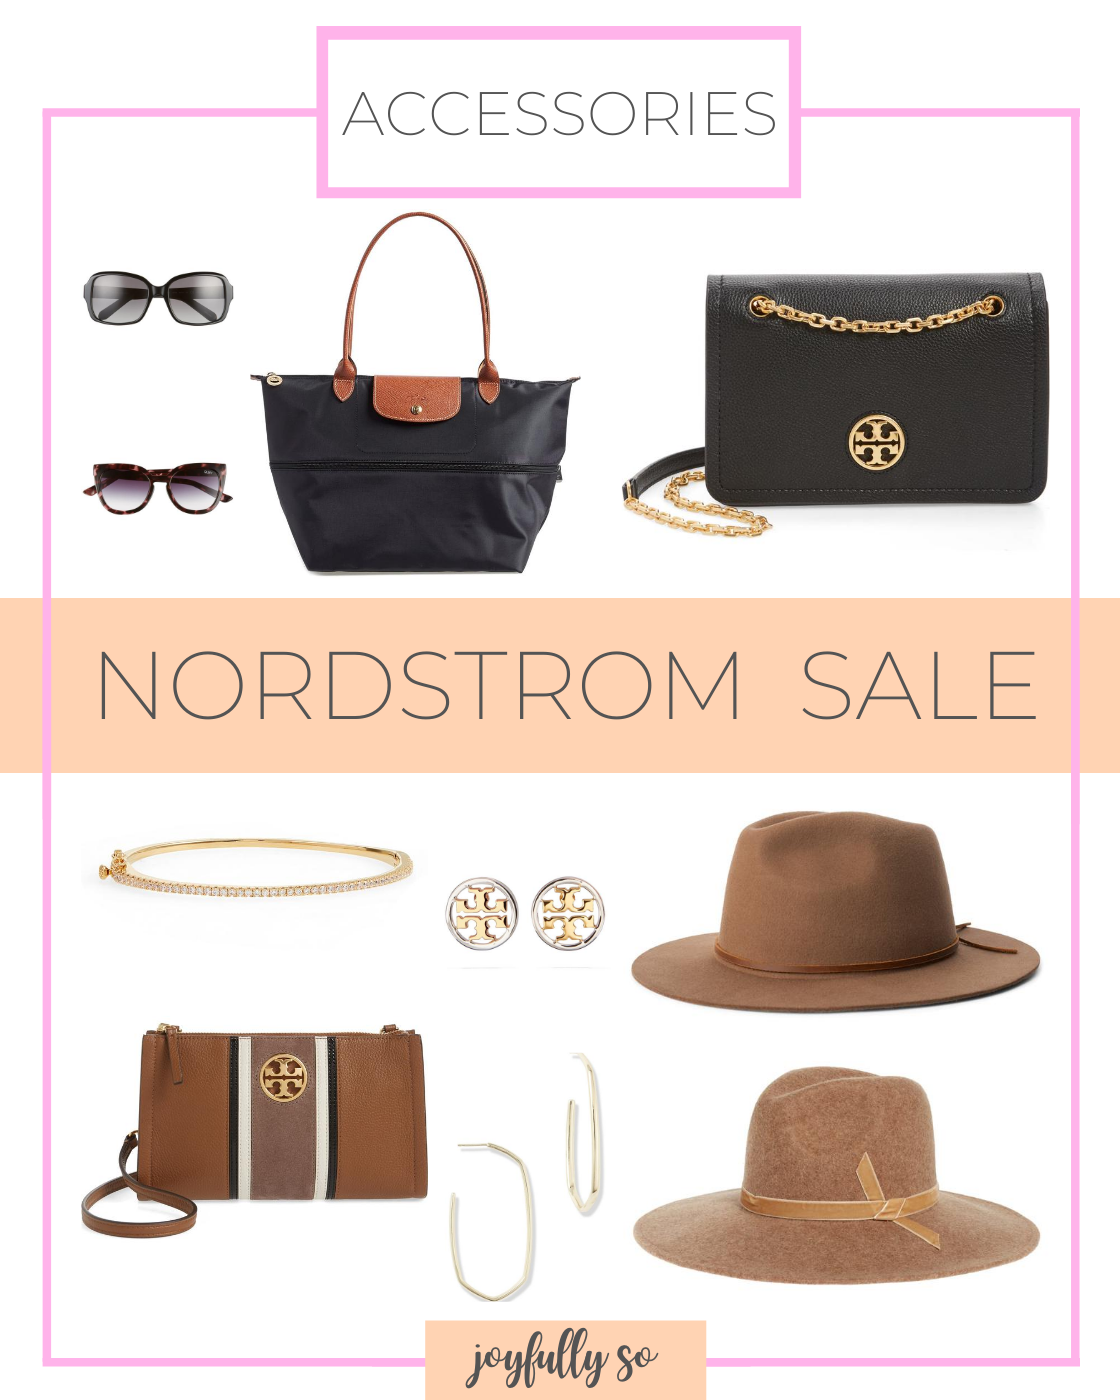 Favorite accessory finds in the Nordstrom Sale! To celebrate the NSale and the new website layout on Joyfully So, there is a Tory Burch giveaway! Let’s get to the Women’s Nordstrom Anniversary Sale 2020 Shopping Guide!